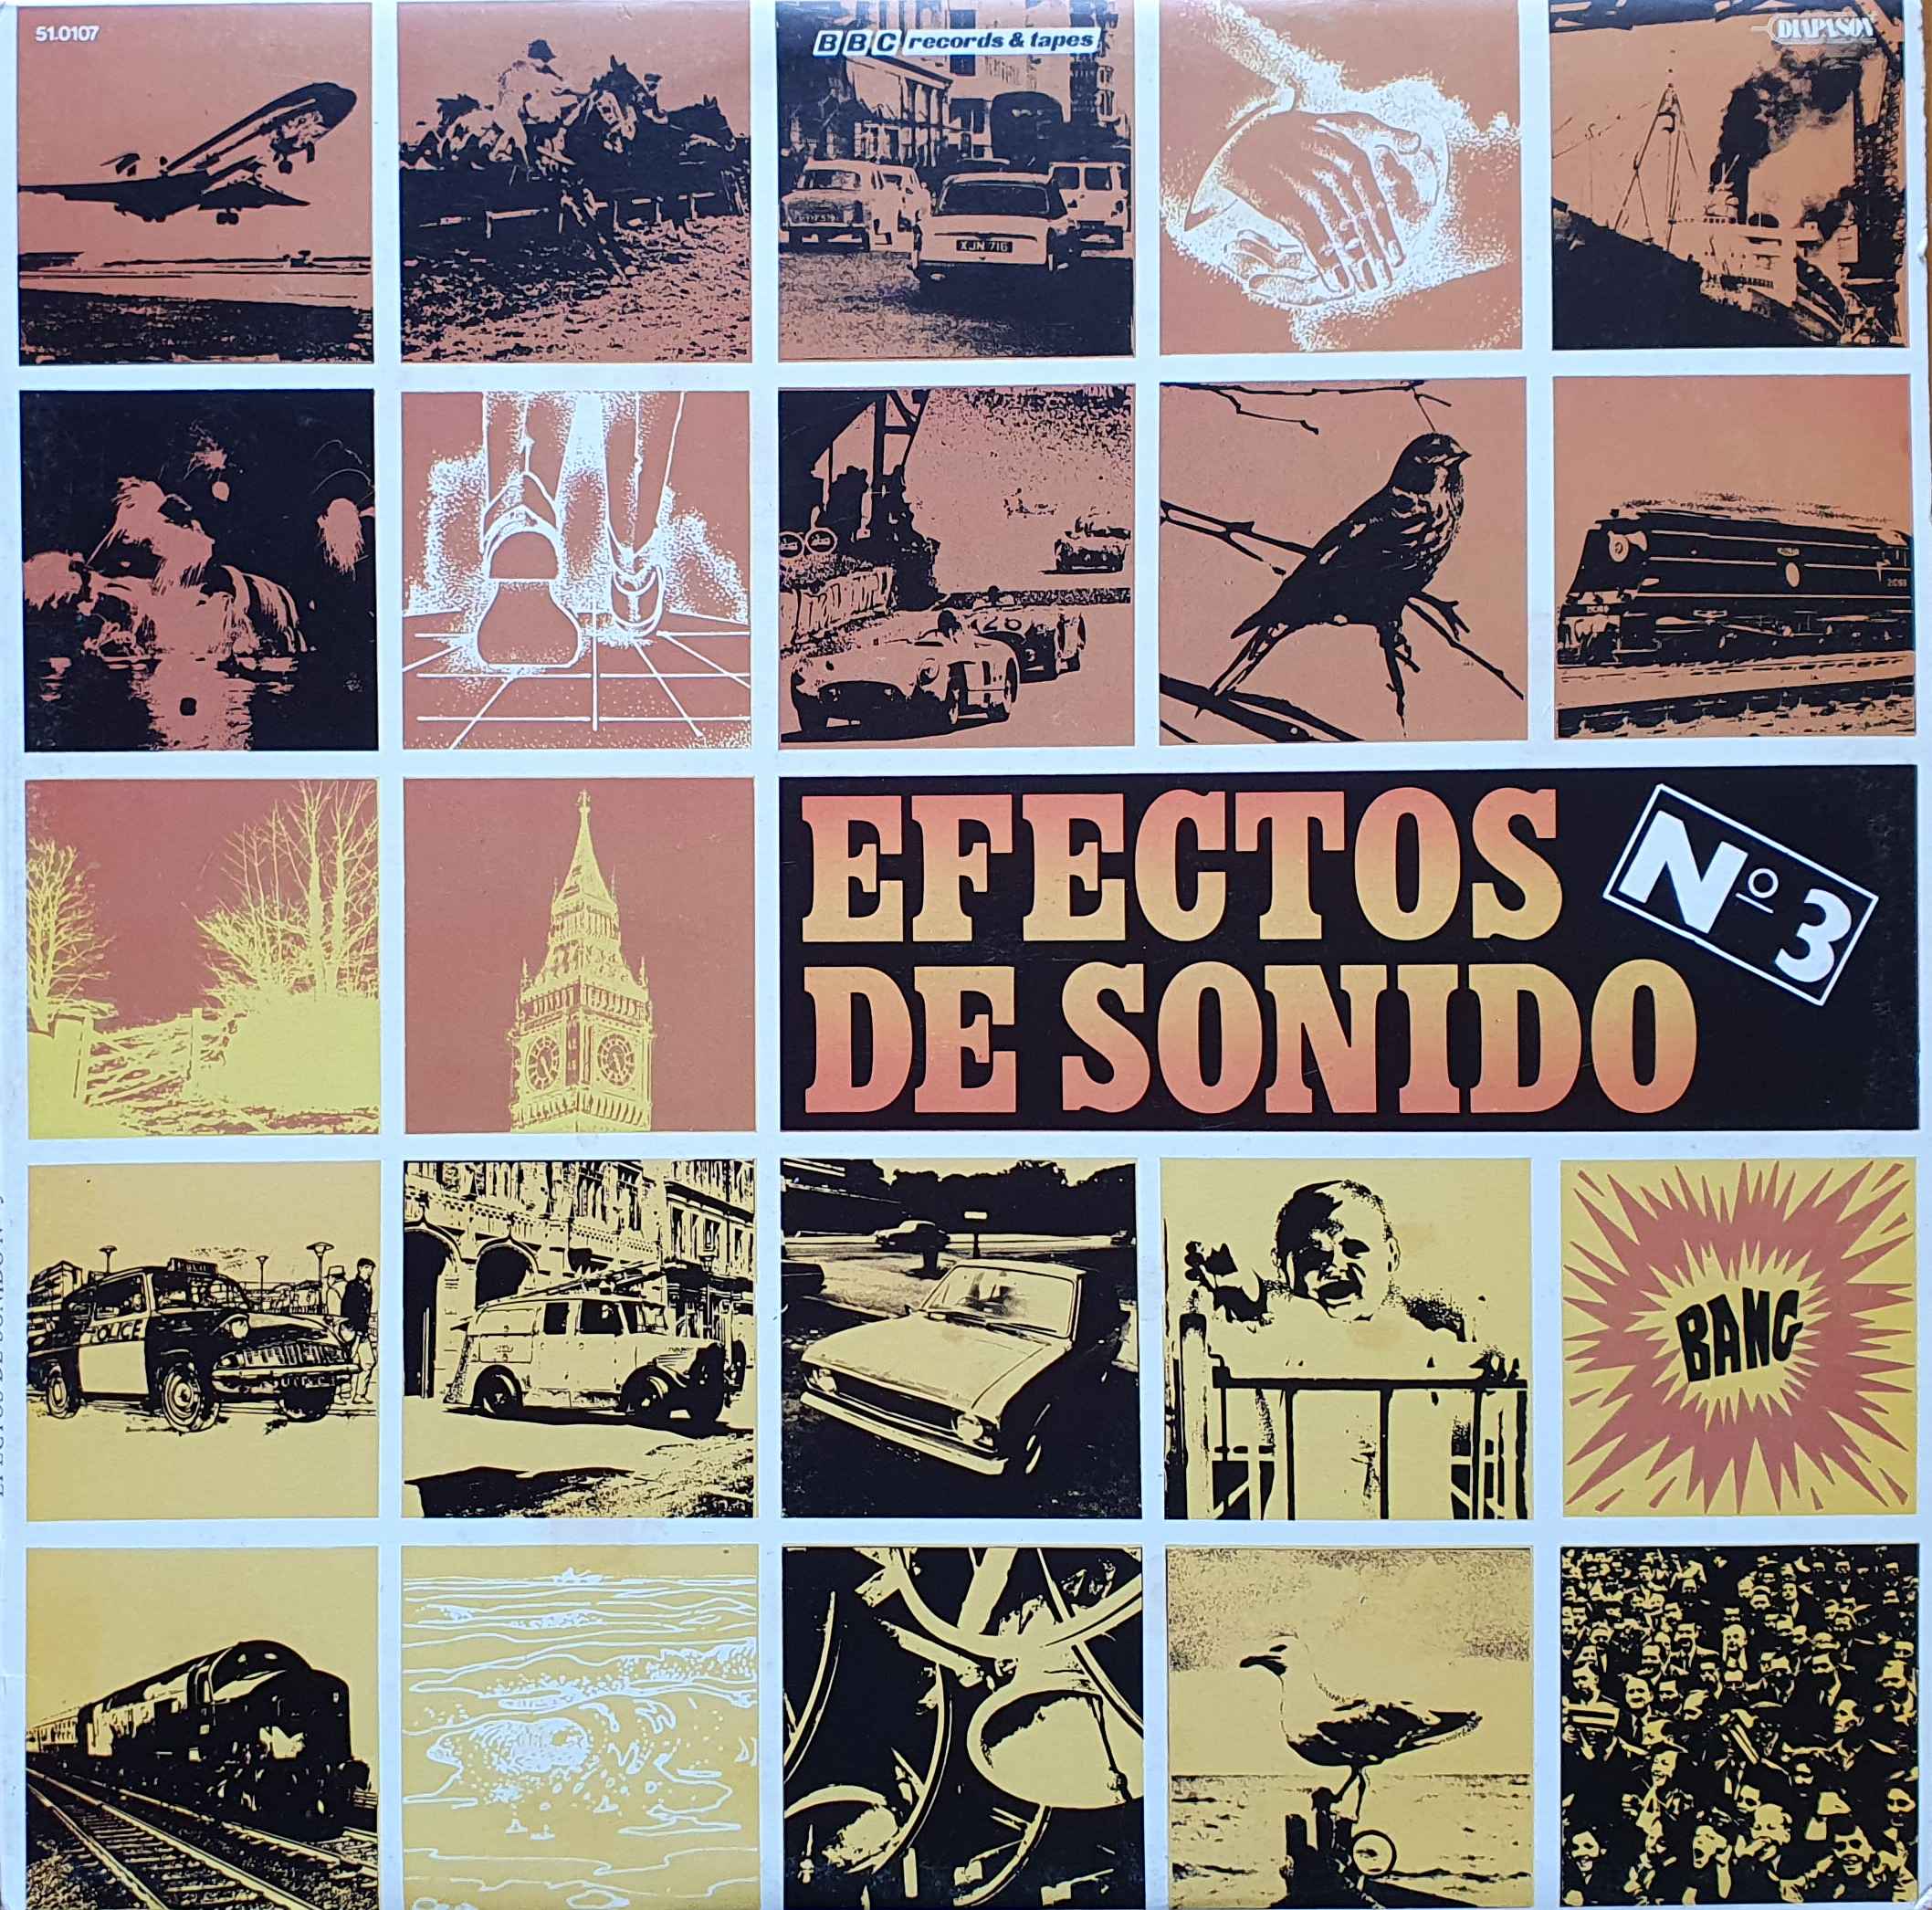 Picture of Efectos de sonido No 3 by artist Various from the BBC albums - Records and Tapes library